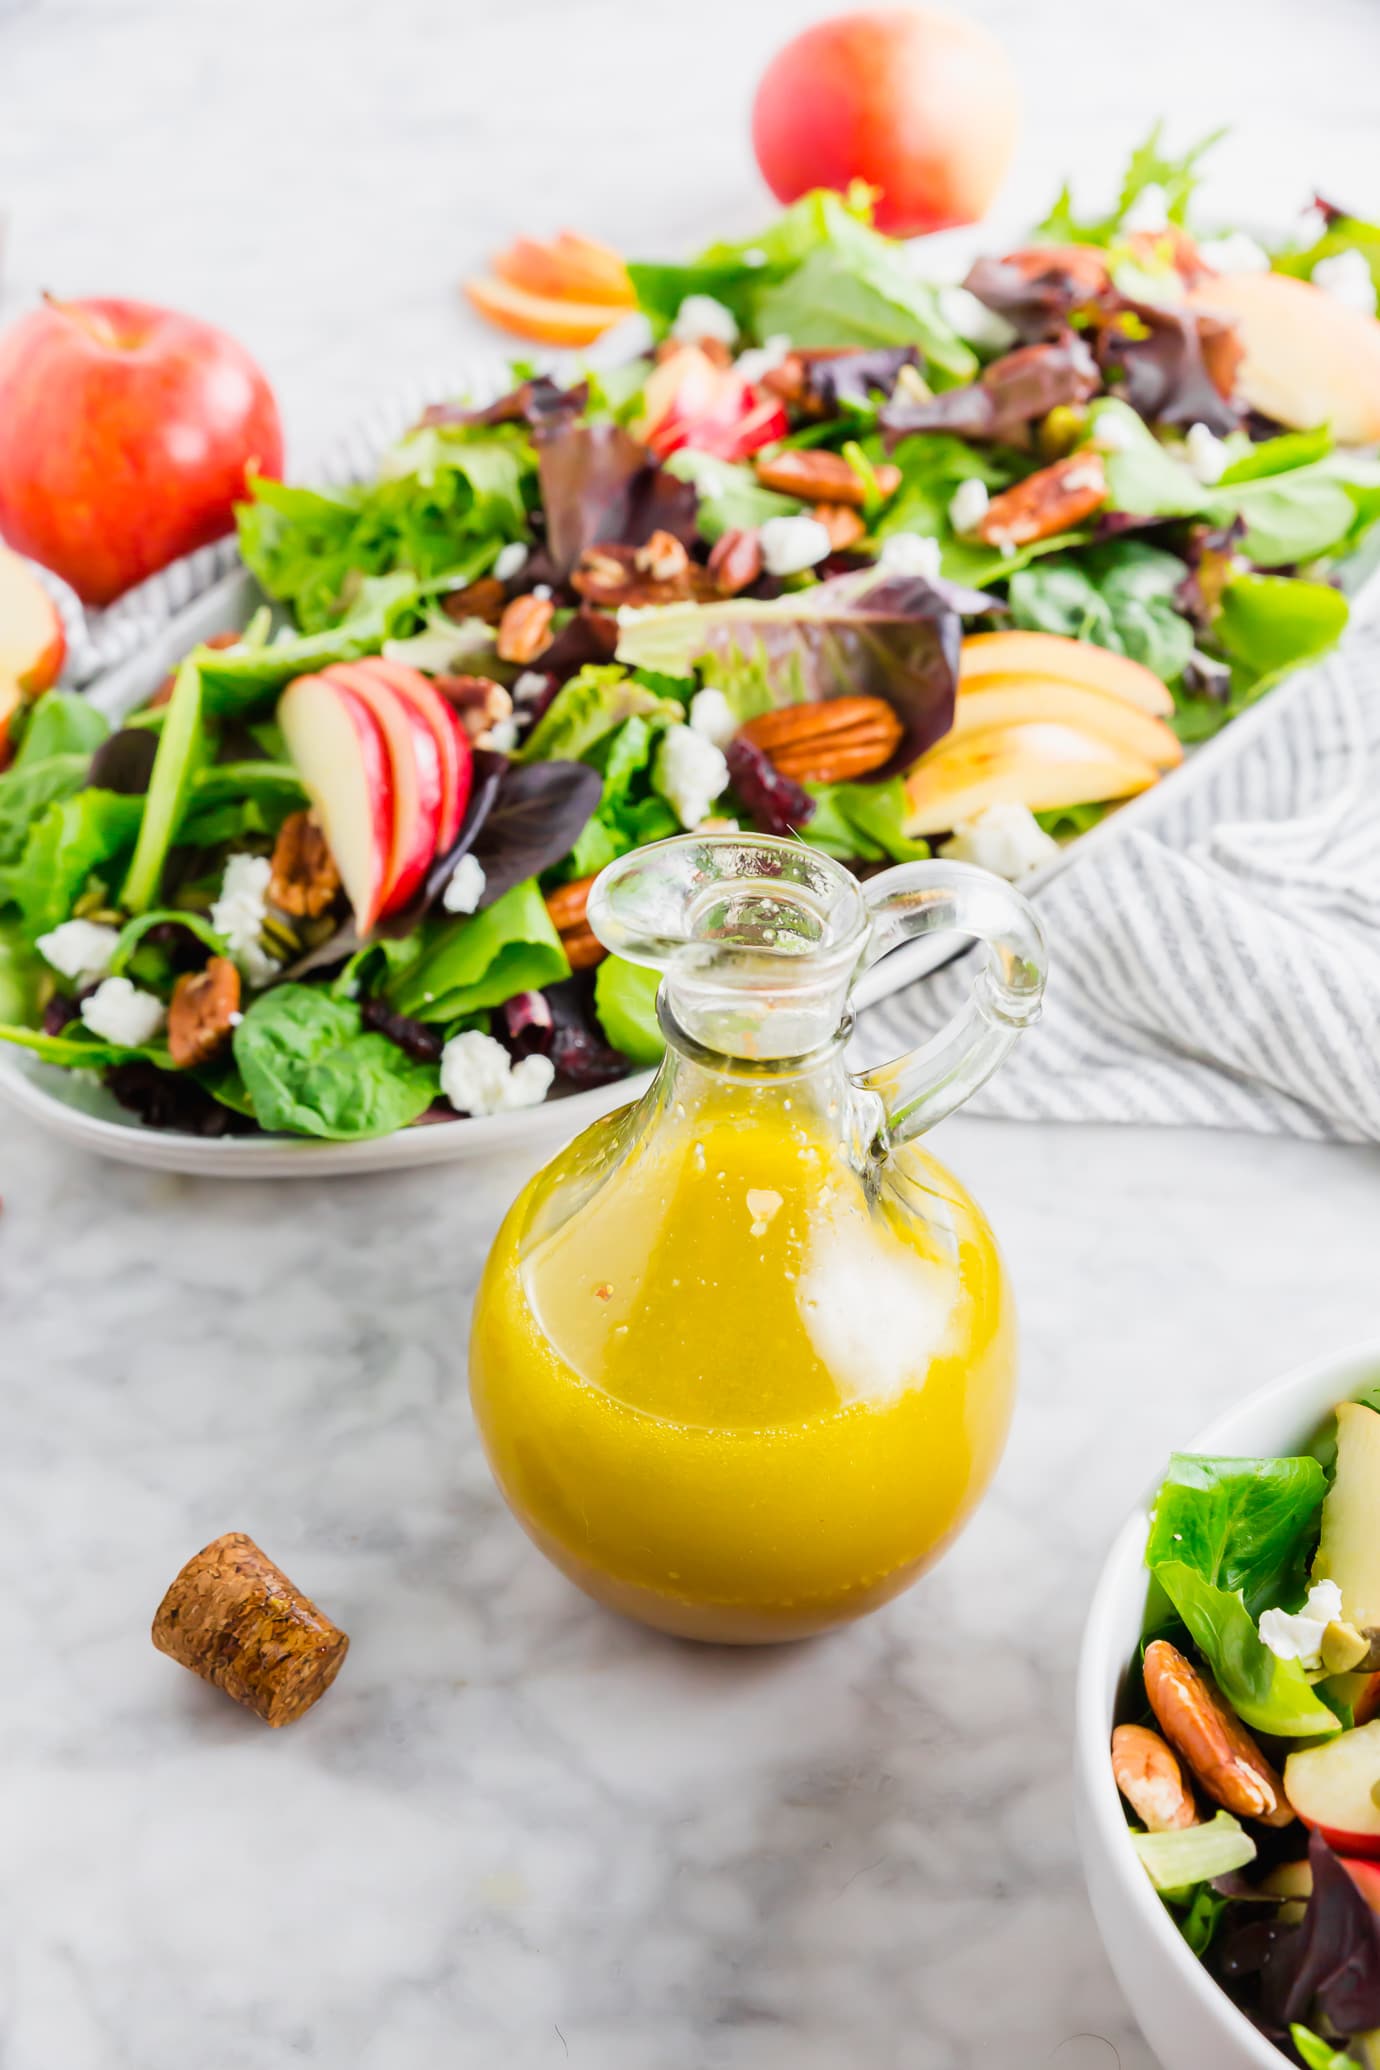 A bottle of homemade apple cider salad dressing in front of a spinach and apple harvest salad.